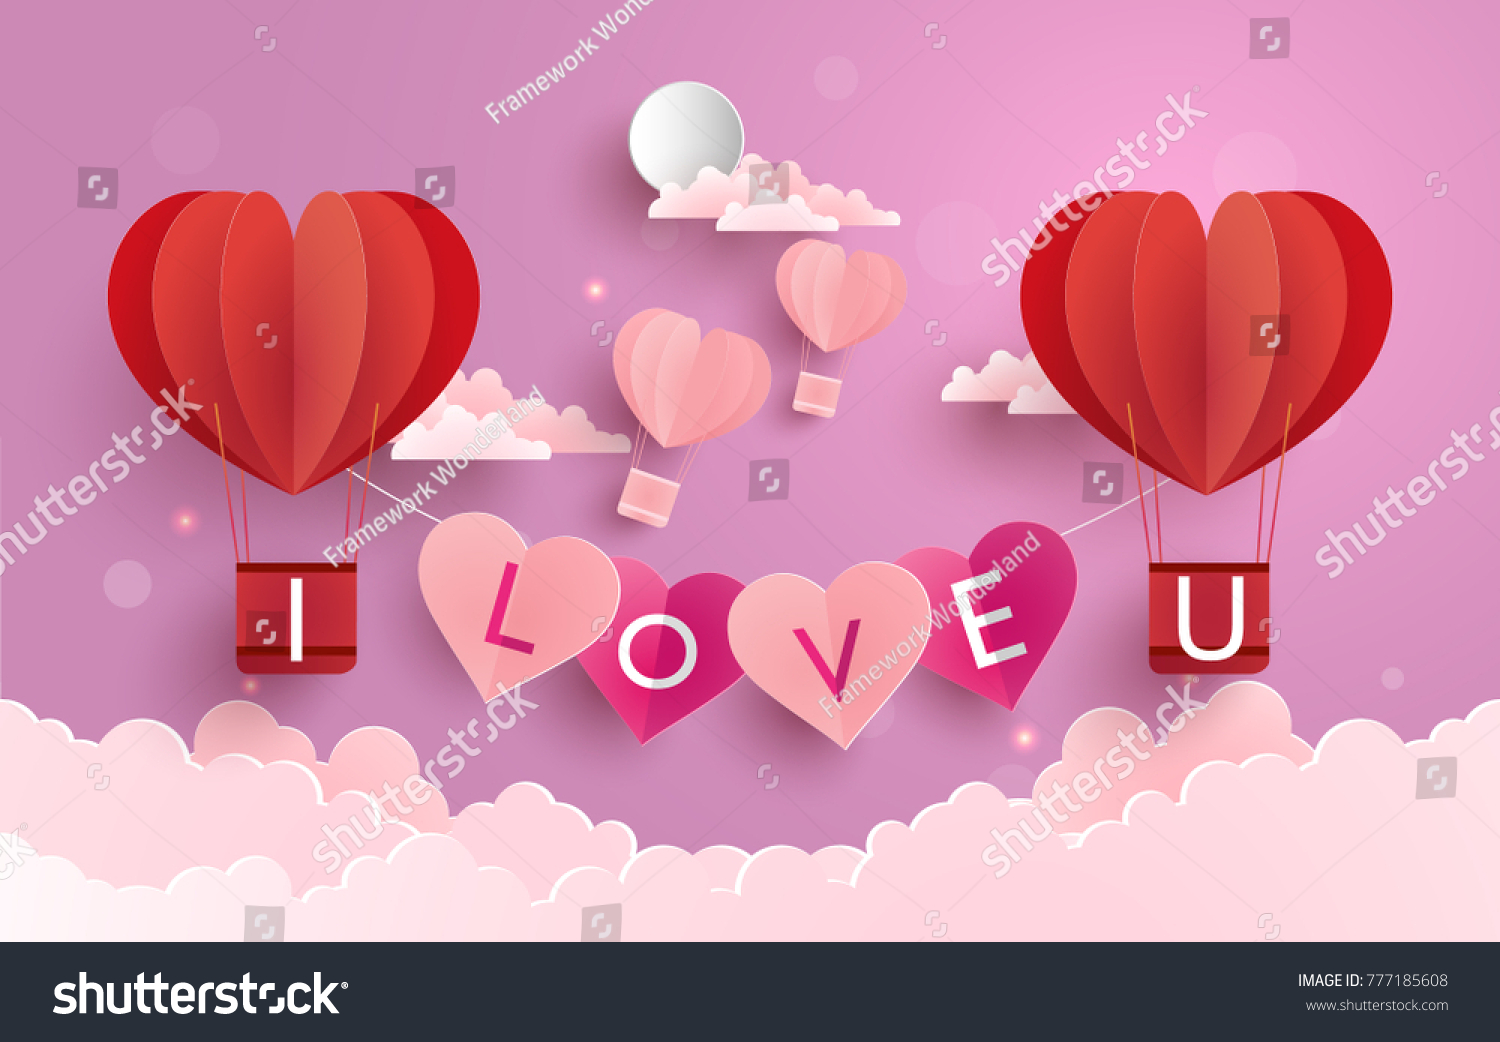 illustration symbol of love with the design of paper art and craft. a purple background with clouds and hot air balloons as a symbol of love #777185608